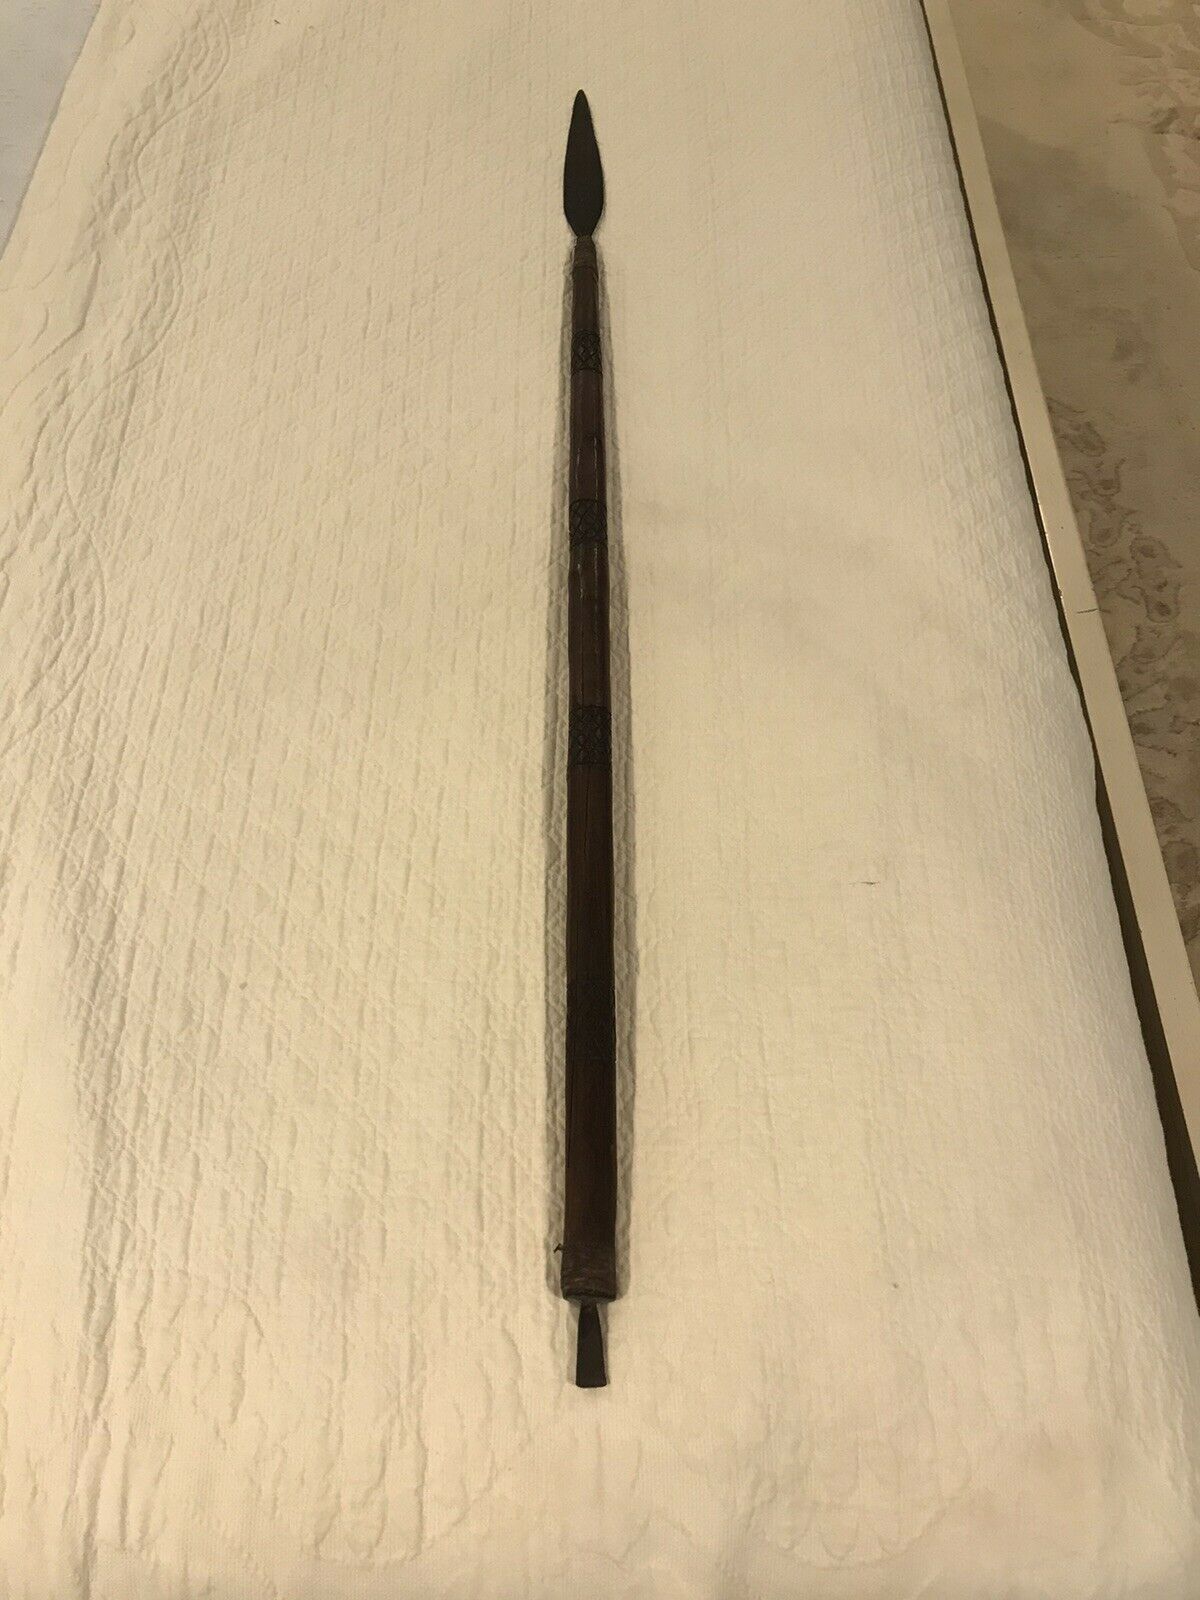 African Assegai (spear) 36" Long With Unusual Metal Tab. I Got It From S. Africa